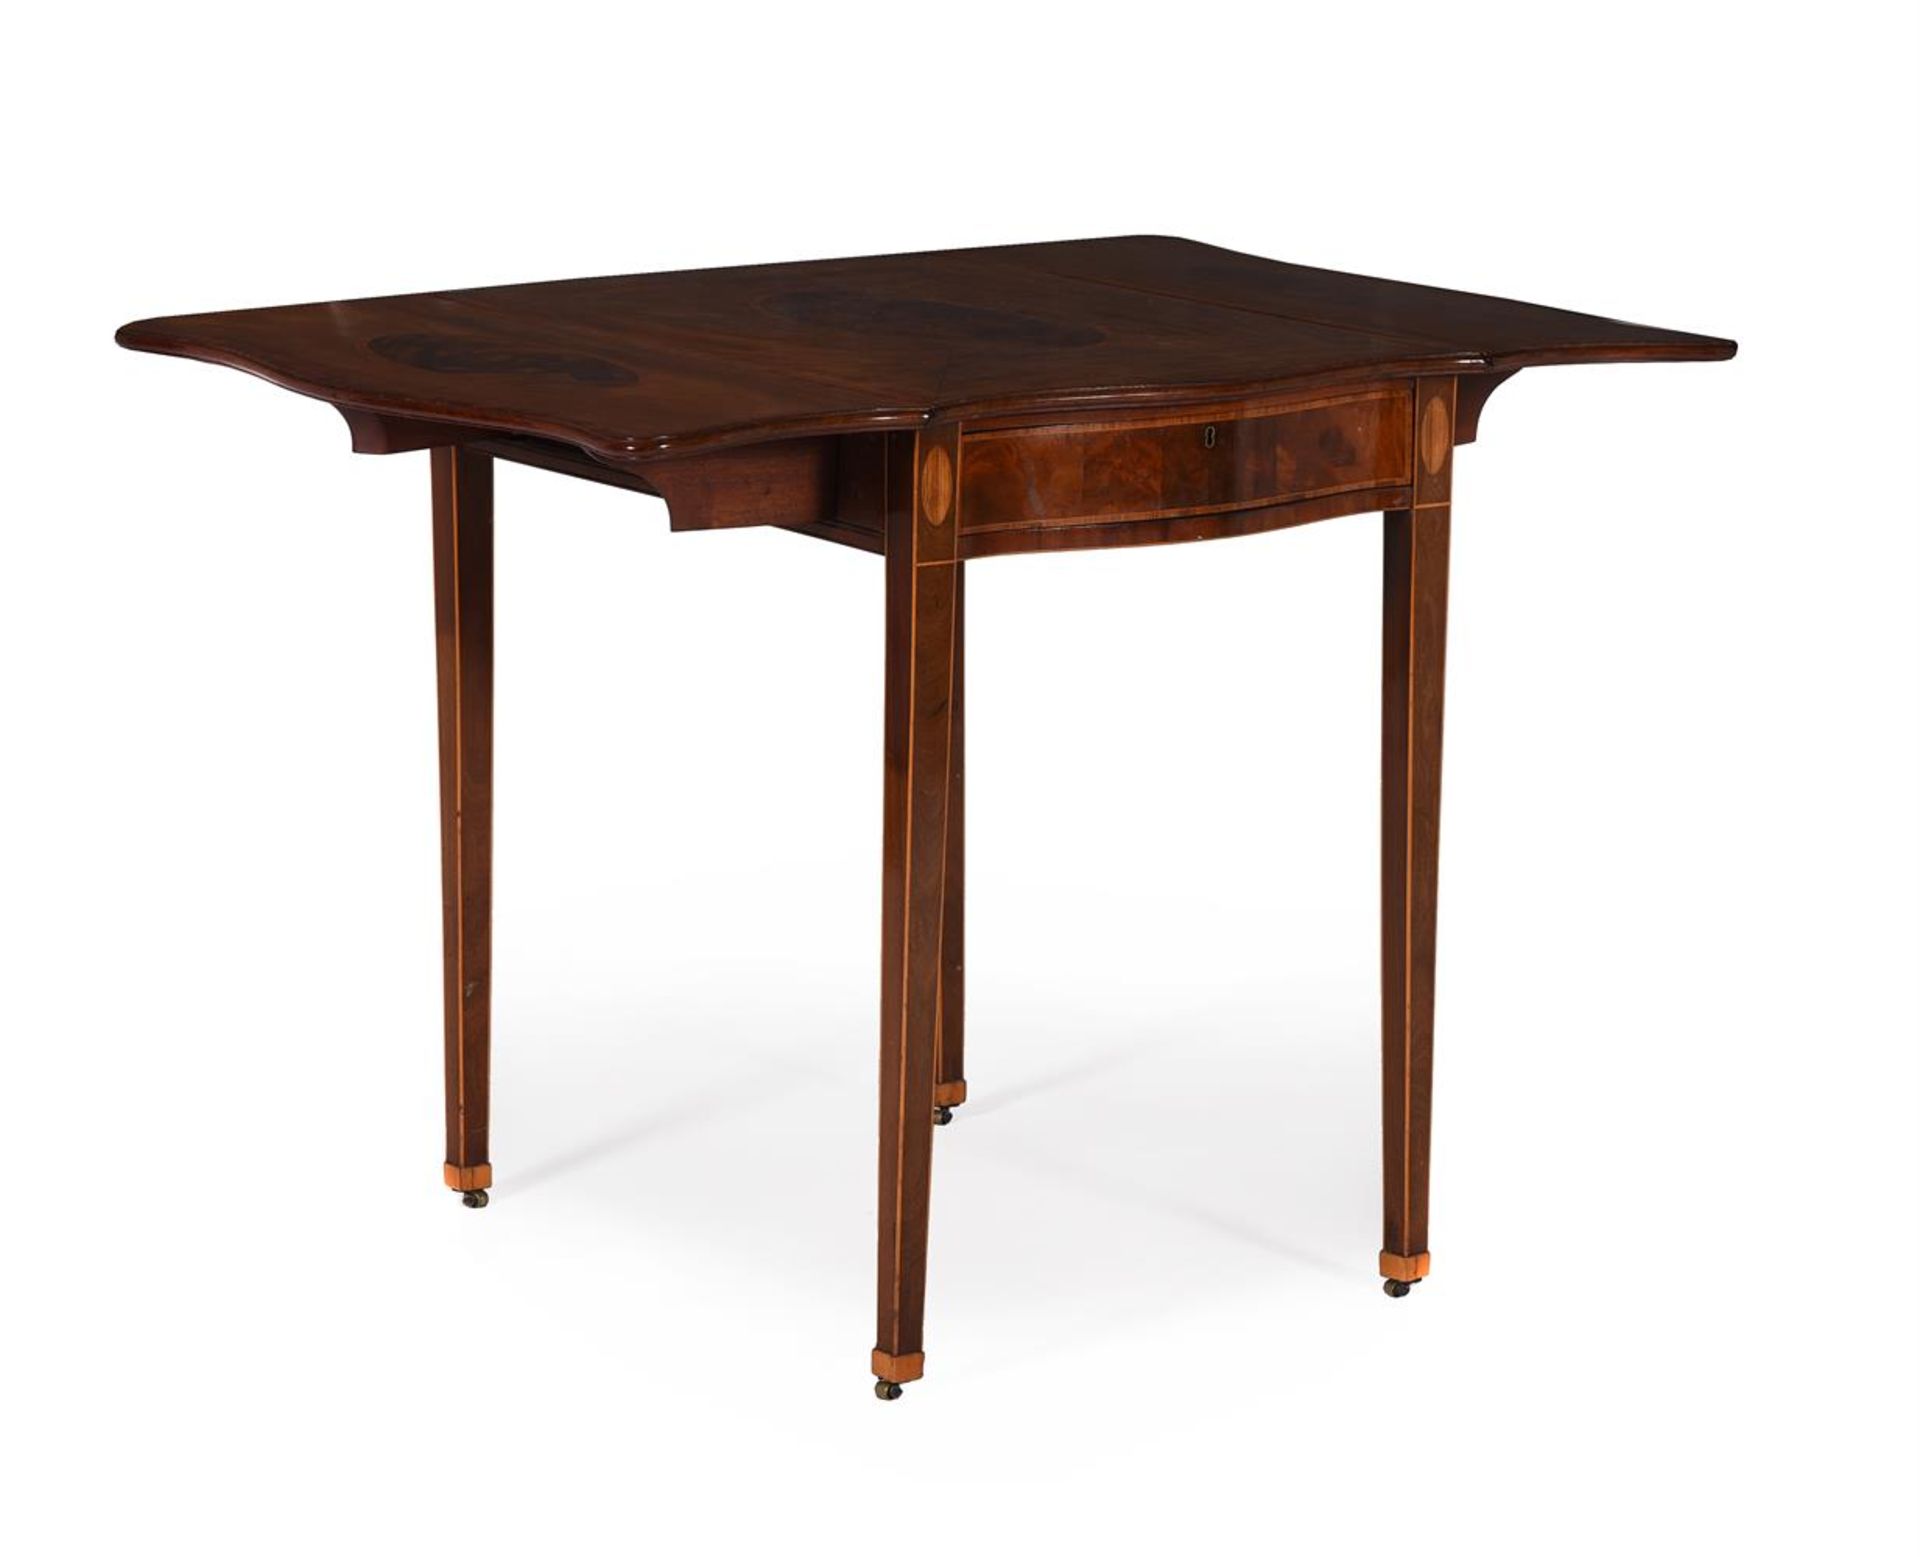 Y A GEORGE III MAHOGANY AND TULIPWOOD BANDED PEMBROKE TABLE